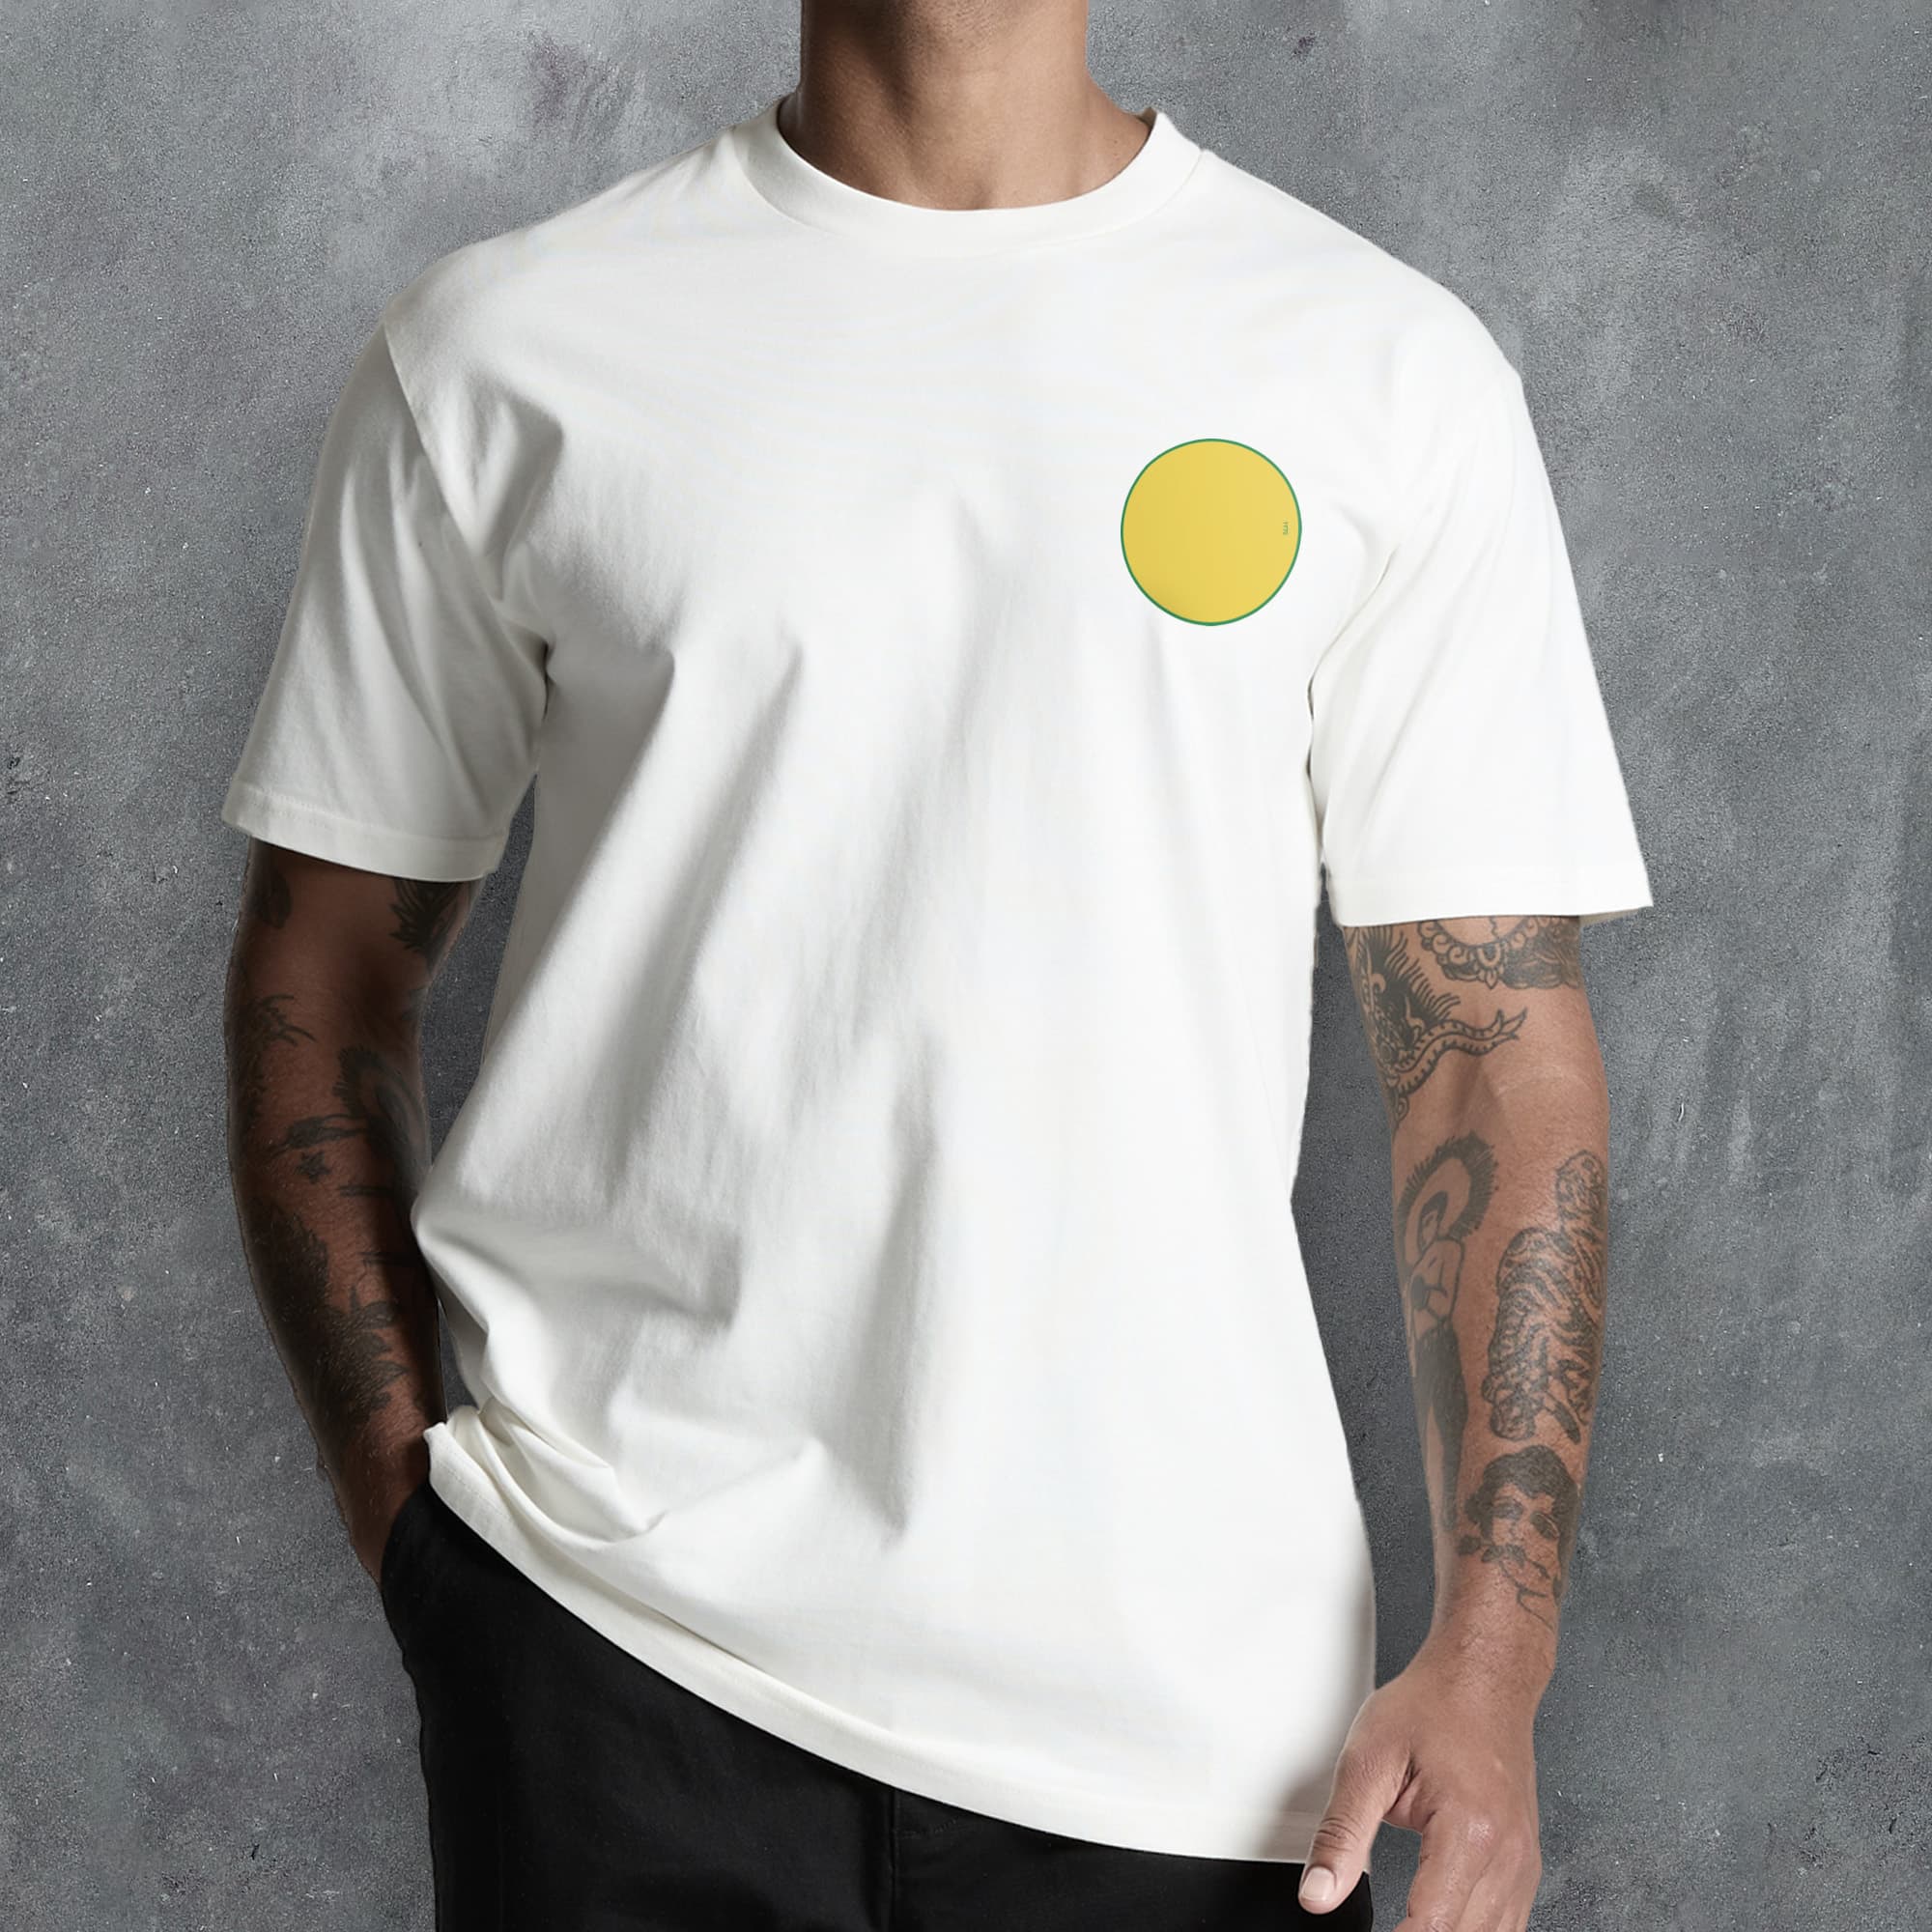 a man wearing a white t - shirt with a yellow circle on it